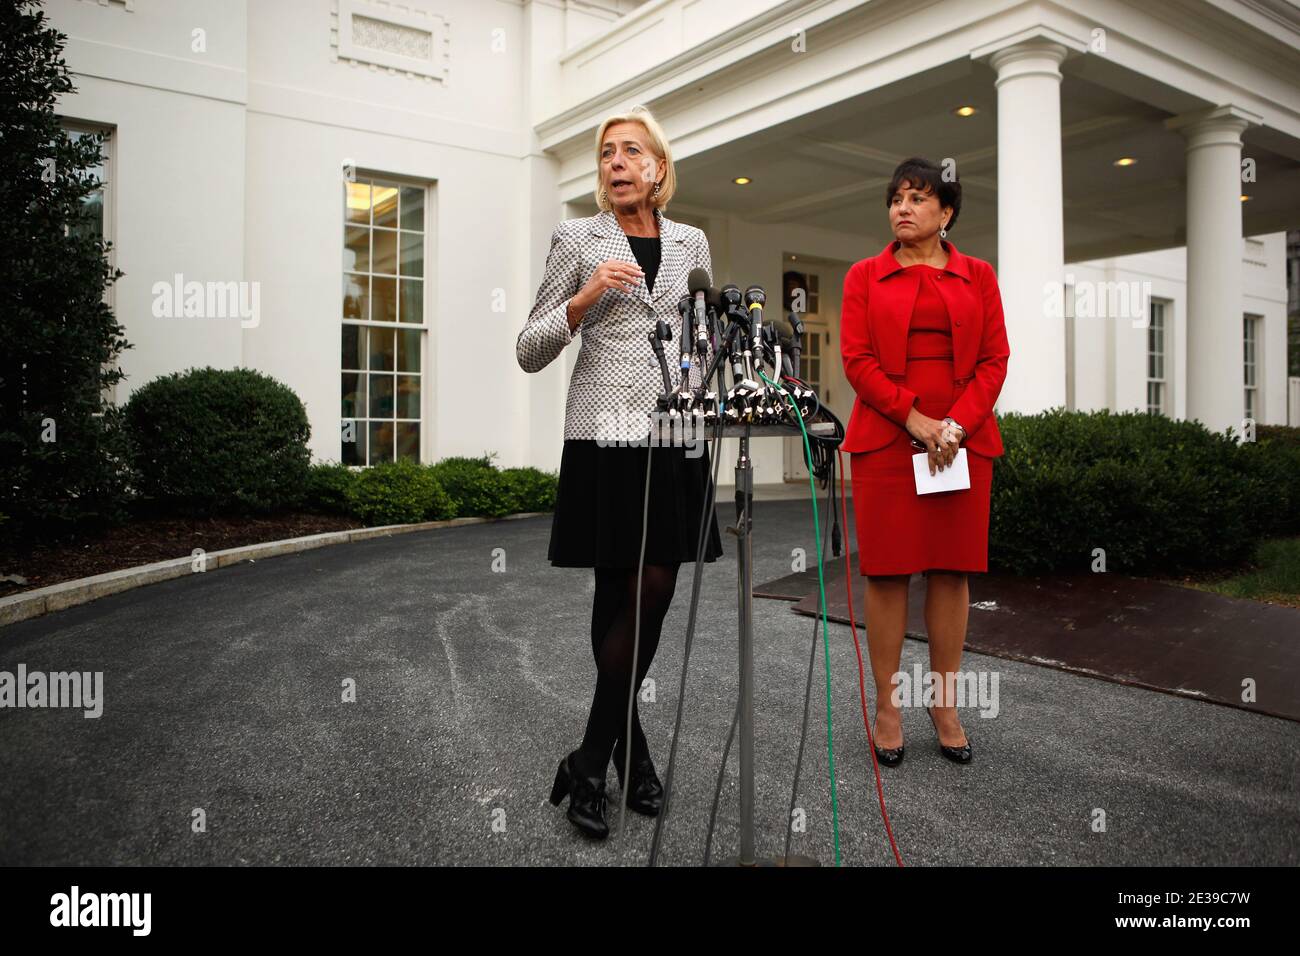 'Pritzker Realty Group Chairman Penny Pritzker (R) and former Change to Win Chair Anna Burger talk to the news media after a meeting of the PresidentÀs Economic Recovery Advisory Board (PERAB) at the White House in Washington, DC, USA on October 04, 2010. President Obama used the meeting to announce the ''Skills for America's Future,'' a program focused on improving partnerships between industry and community colleges with the goals of workforce development strategies, job training programs and job placement. Photo by Chip Somodevilla/ABACAPRESS.COM (Pictured: Penny Pritzker, Anna Burger)' Stock Photo